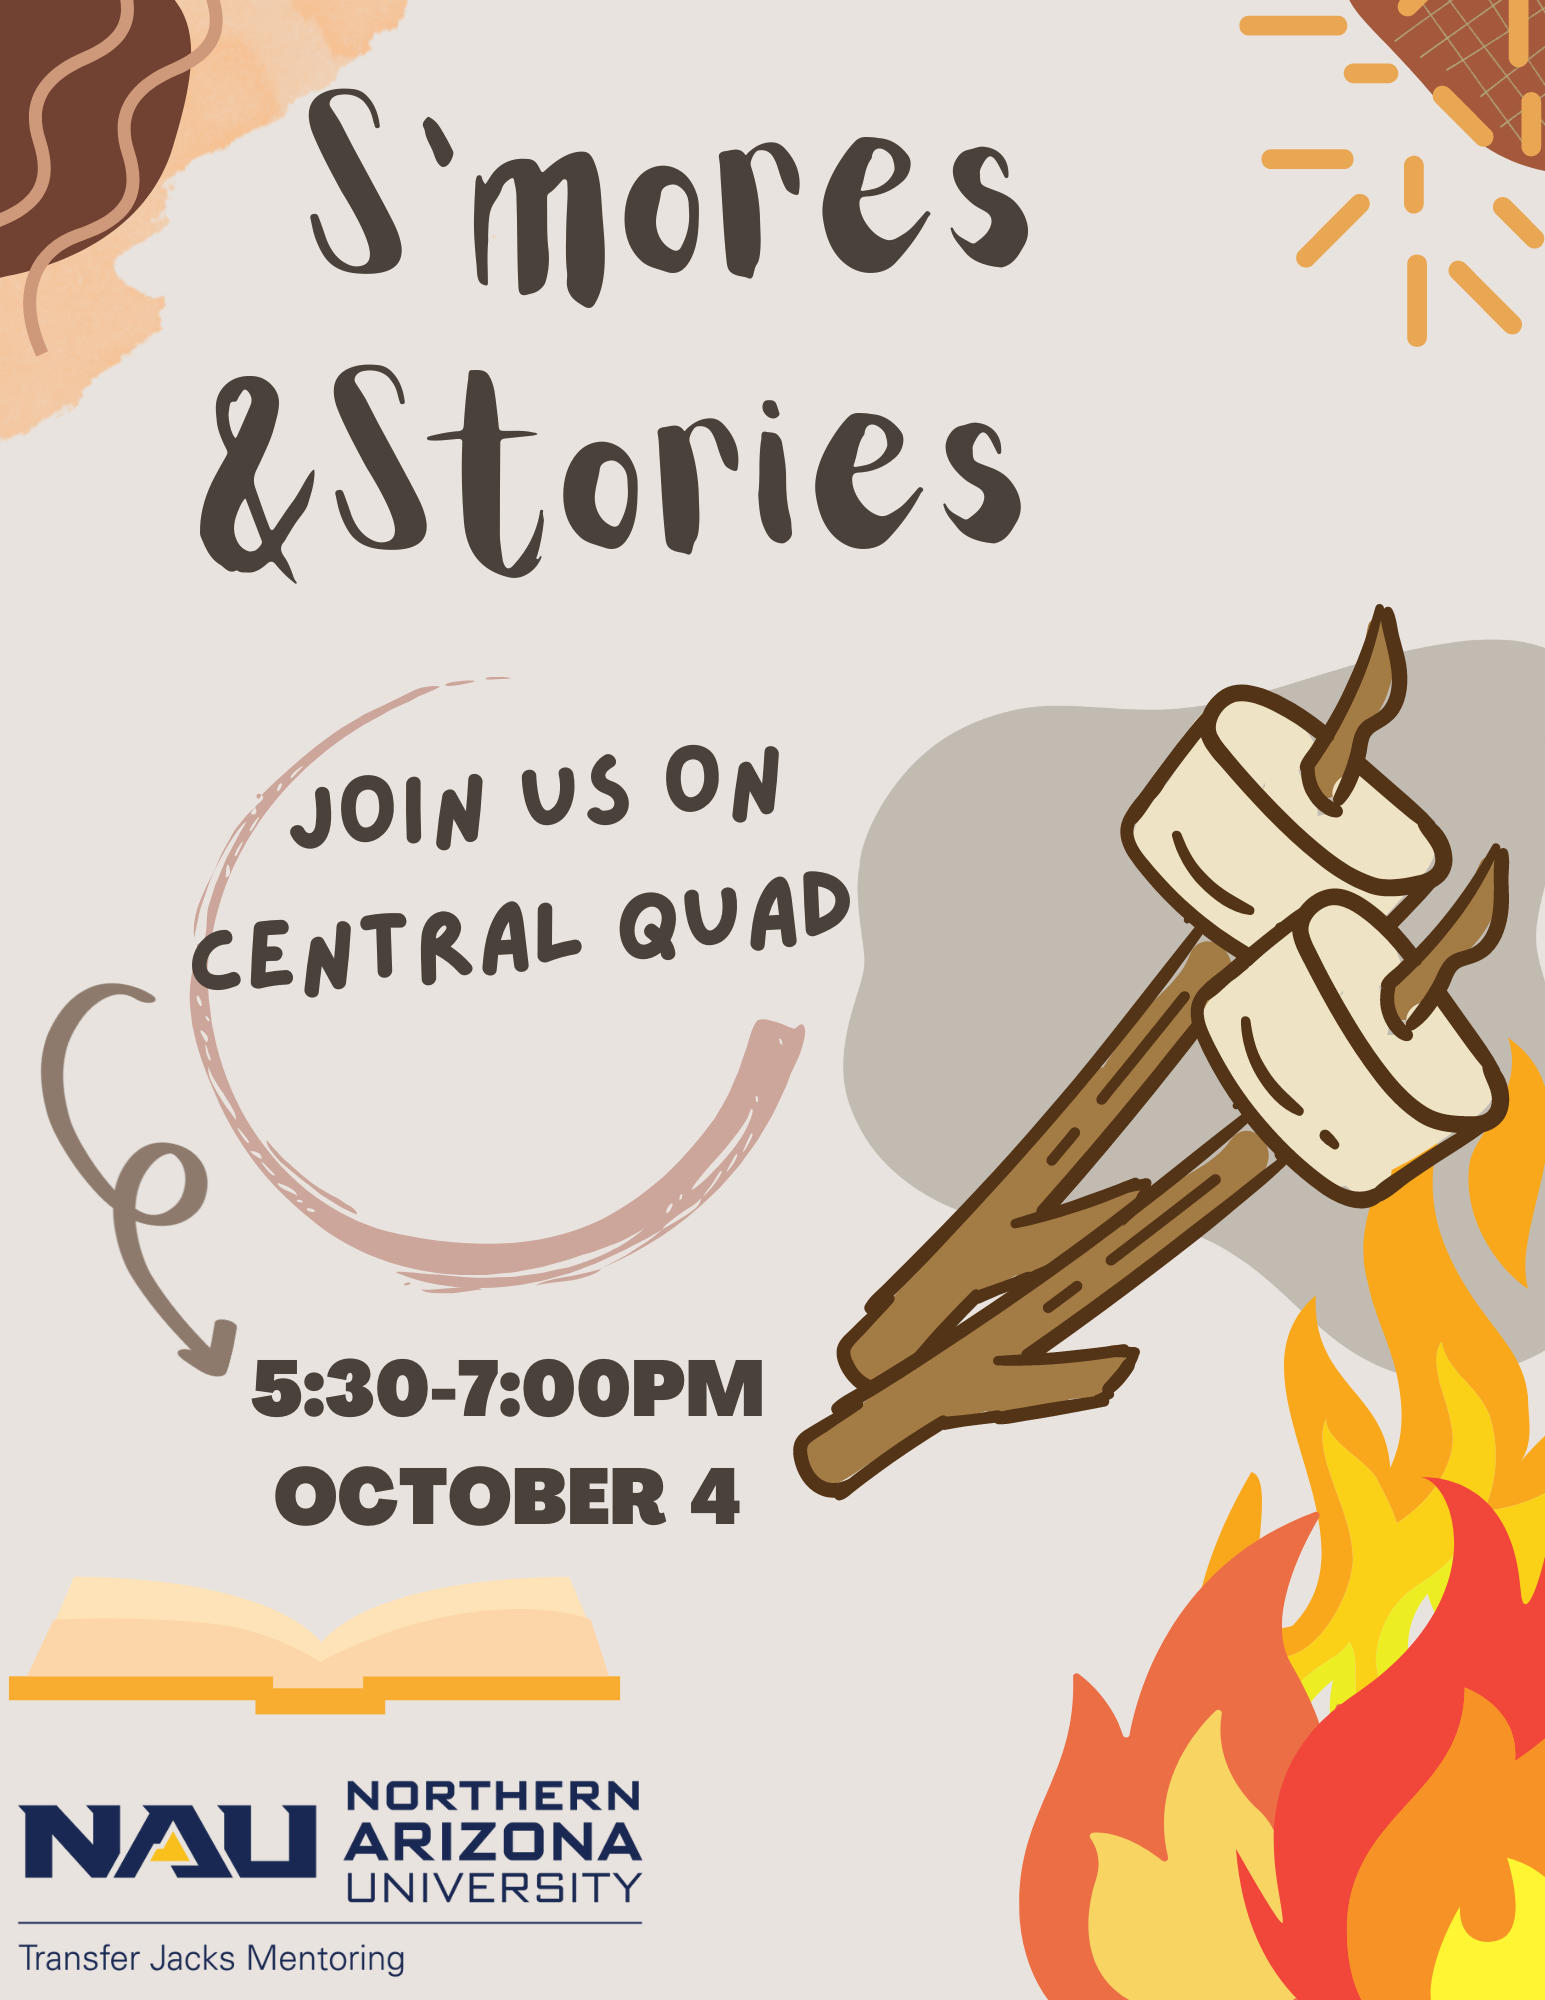 S'mores & Stories Flyer.png